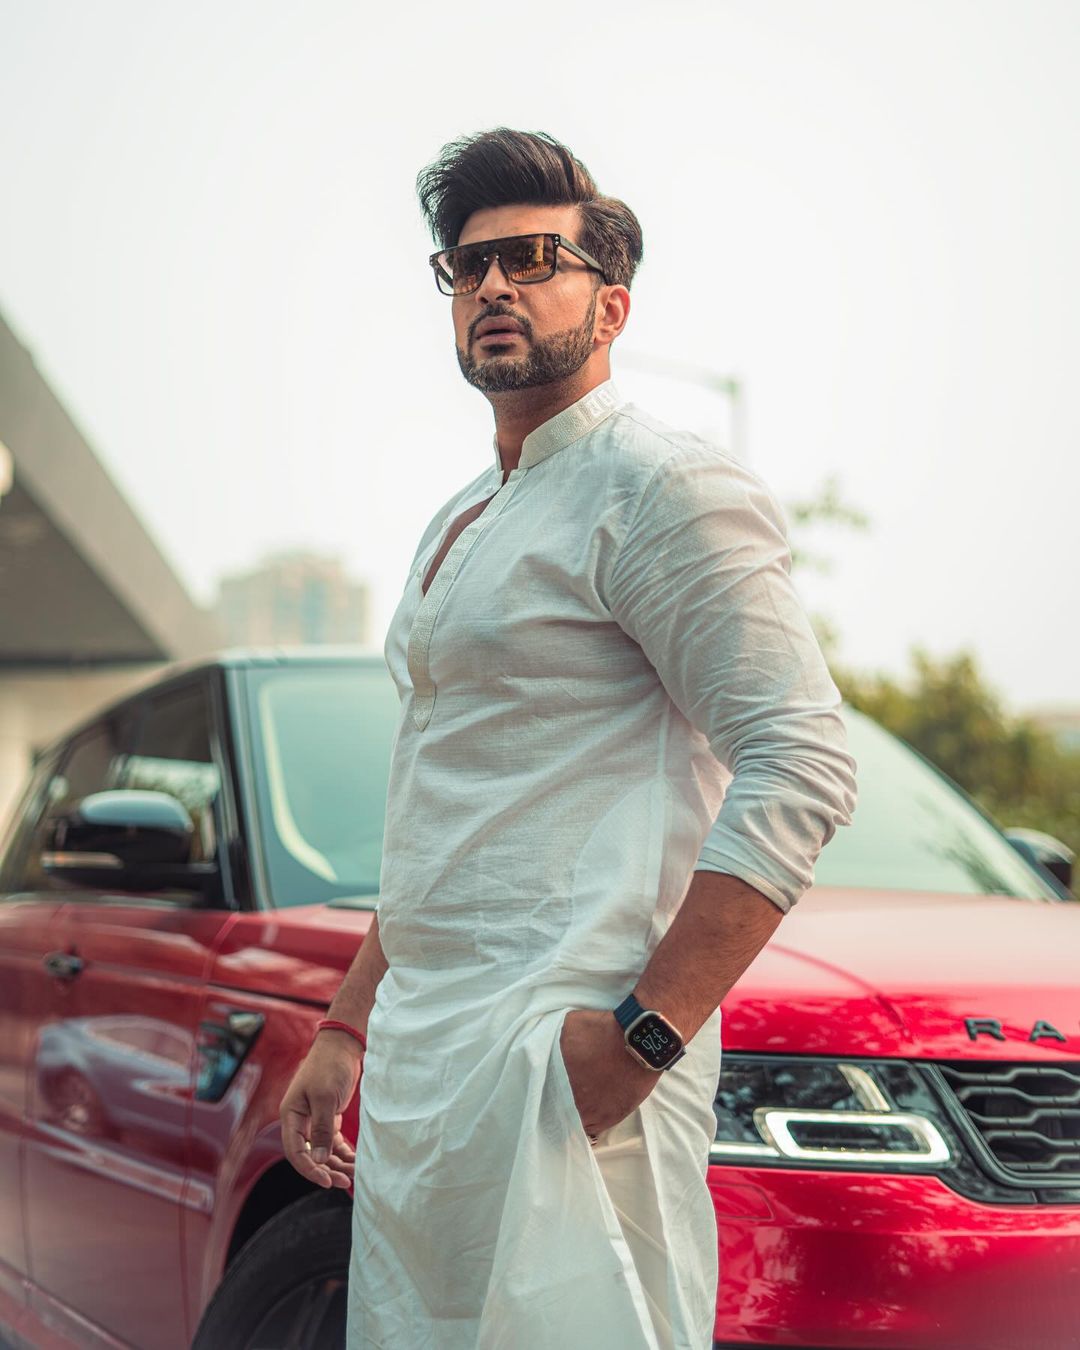 Handsome Actor Karan Kundrra Completes 15 Years In Industry Who Penned A Note For His Fans! Let’s See How Fans Shower Love For Him!